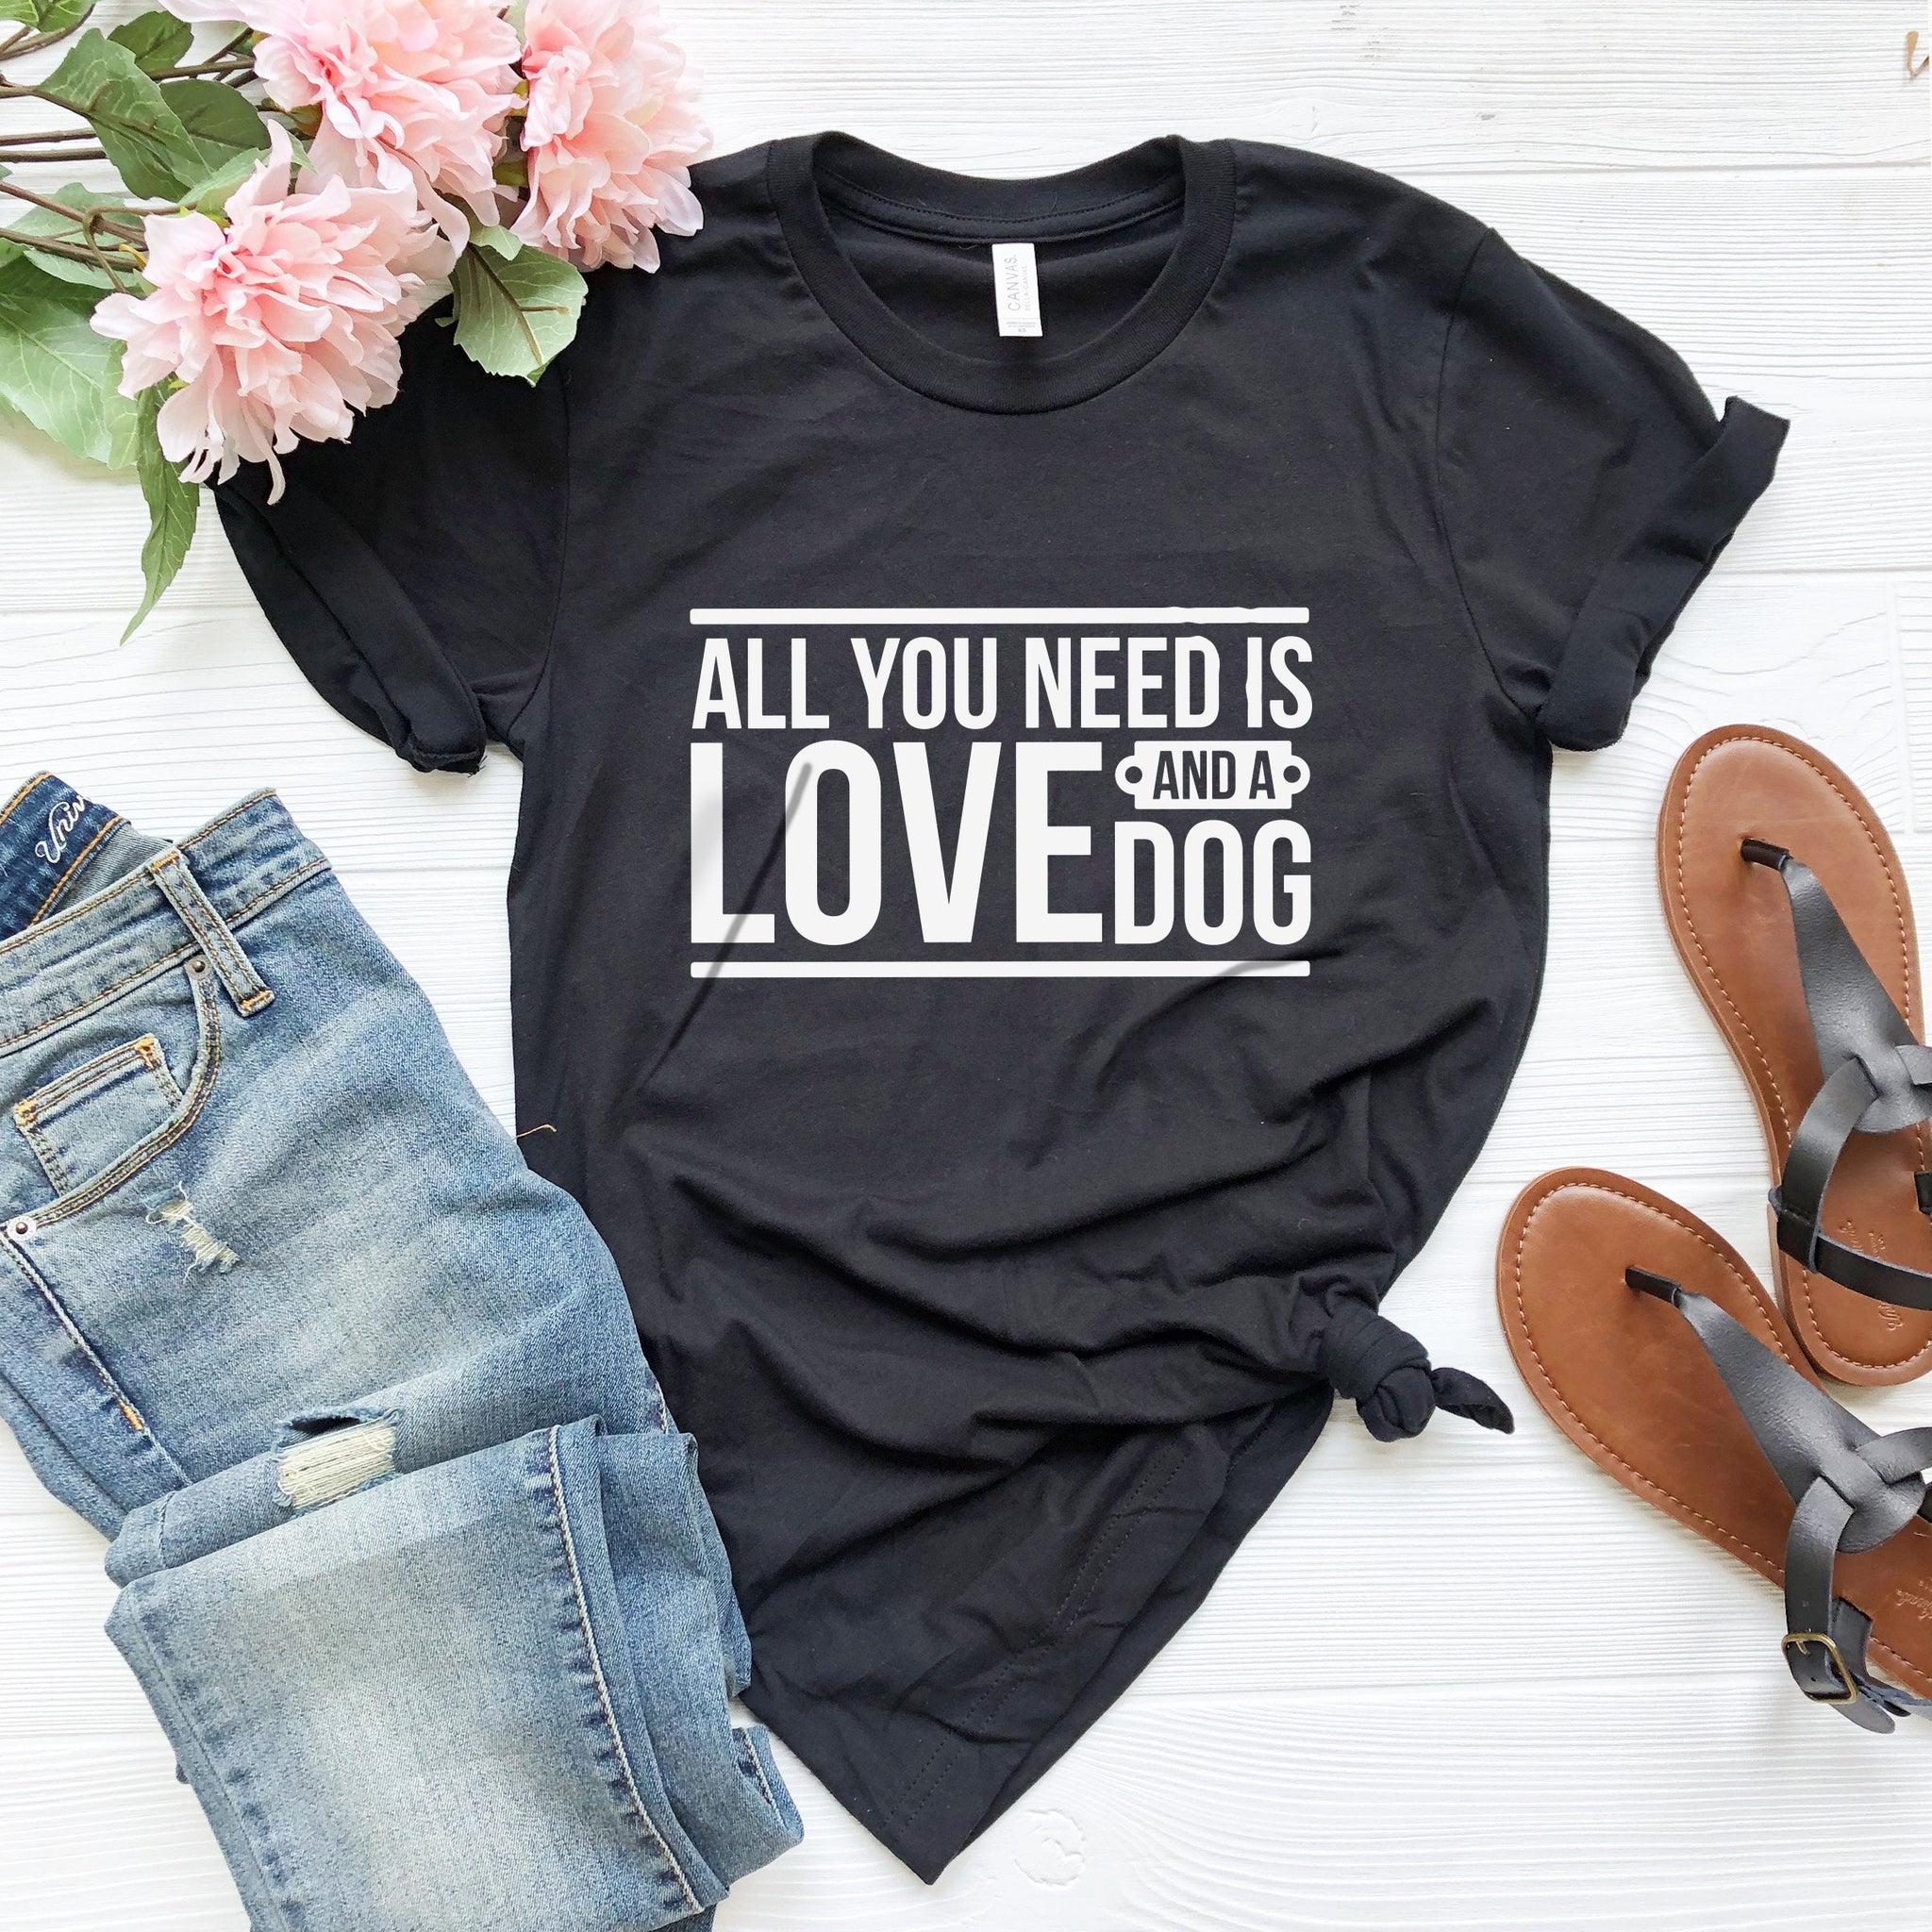 You need Love and a Dog! - Fastdeliverytees.com